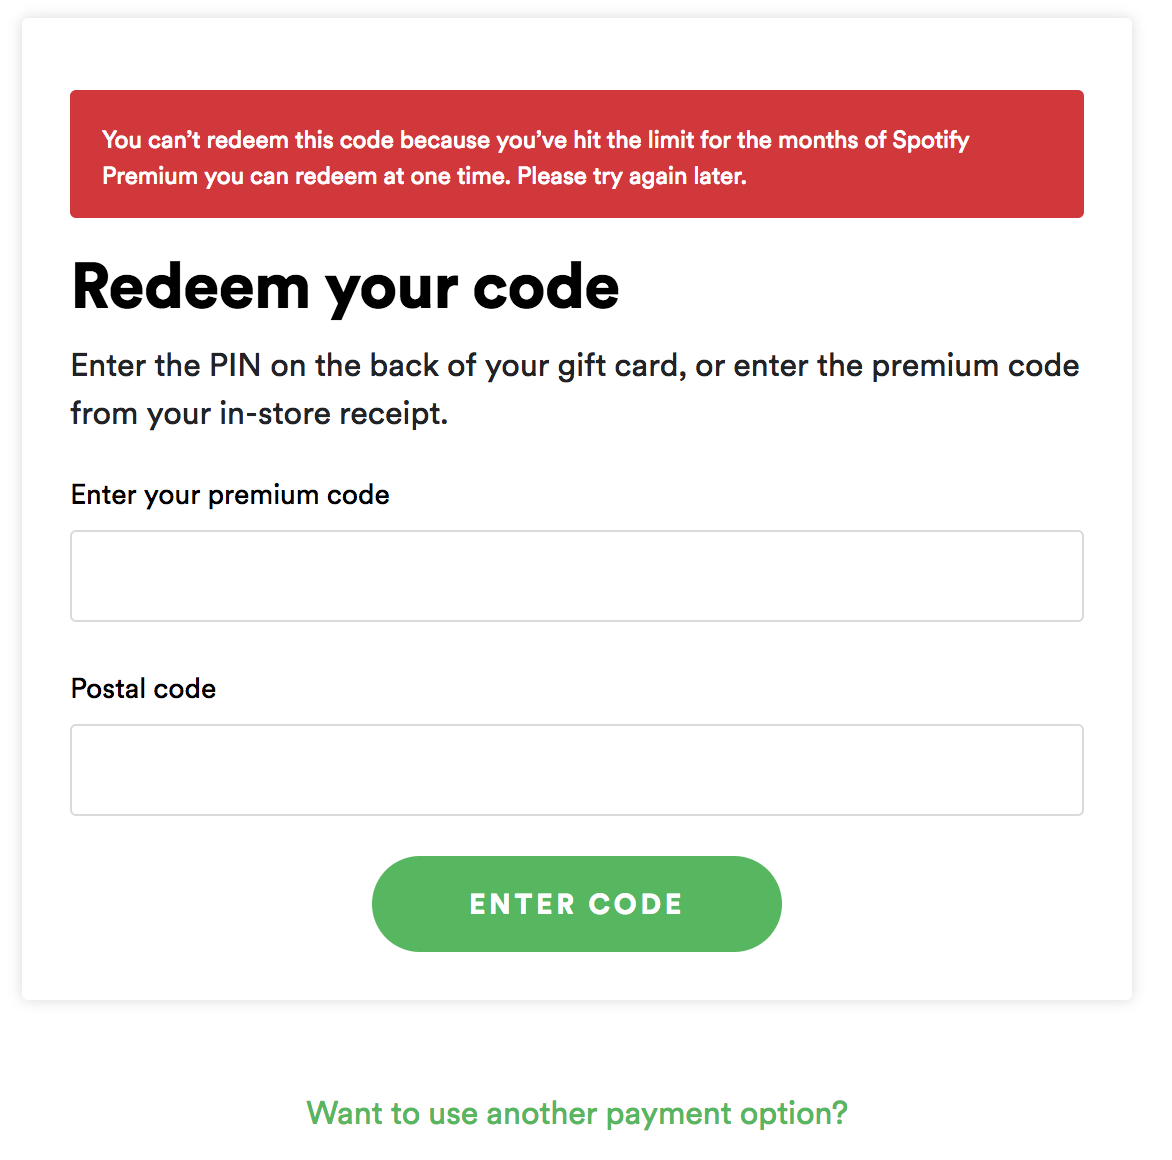 Redeemed One Gift Card Now I Cannot Redeem Anothe The Spotify Community